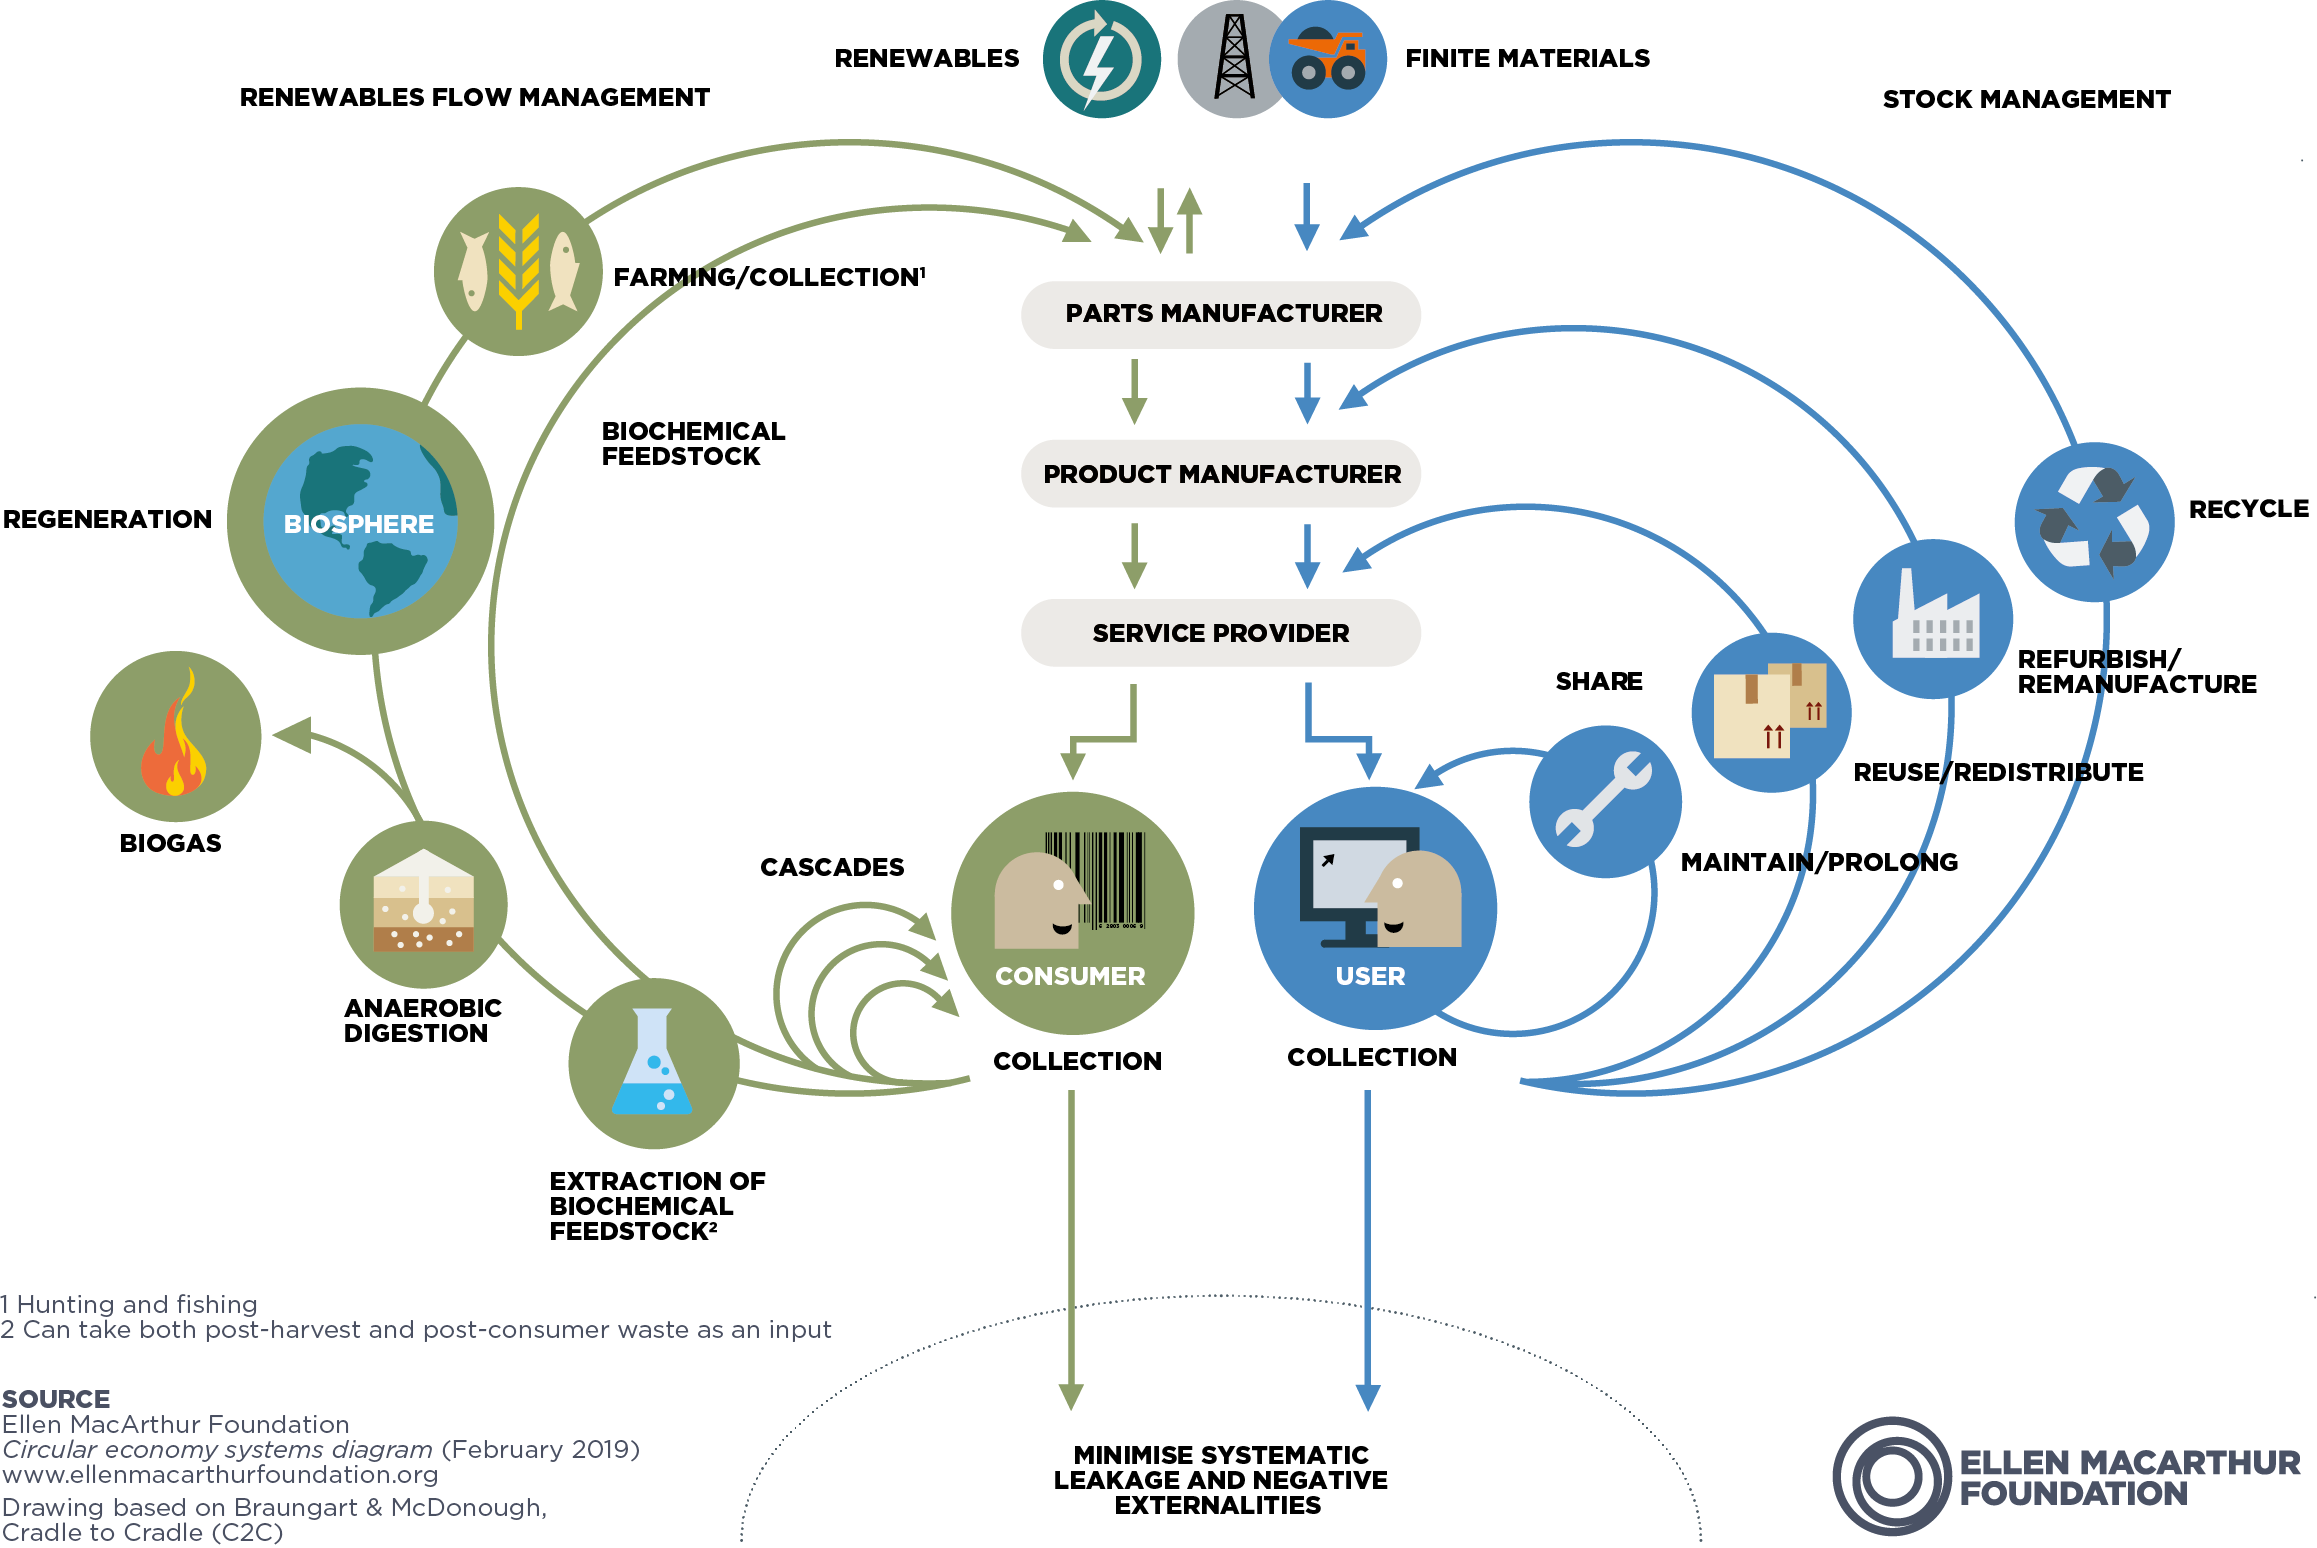 Image visualising the circular economy by the Ellen Macarthur Foundation. Source: https://ellenmacarthurfoundation.org/circular-economy-diagram